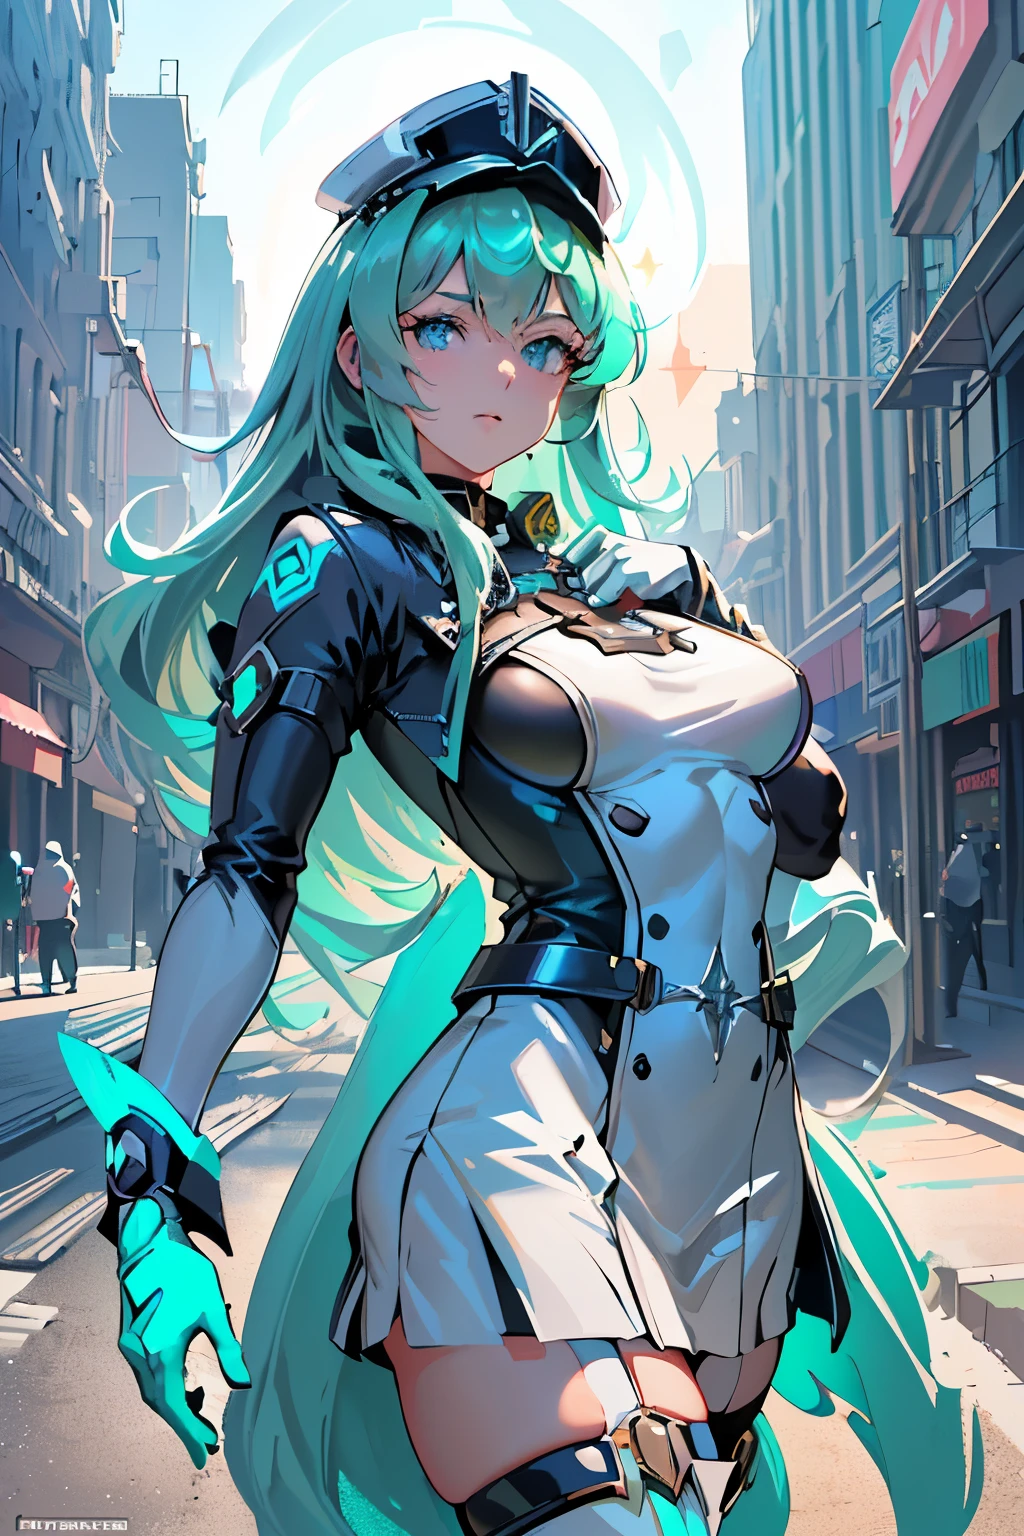 Anime, Girl, (((1girl))), (((Waifu, Xenoblade Chronicles 2, Pneuma Waifu))), (((Seafoam Green Hair, Long Hair))), ((Seafoam Green Eyes eyes:1.3, Upturned Eyes: 1, Perfect Eyes, Beautiful Detailed Eyes, Gradient eyes: 1, Finely Detailed Beautiful Eyes: 1, Symmetrical Eyes: 1, Big Highlight On Eyes: 1.2)), (((Lustrous Skin: 1.5, Bright Skin: 1.5, Skin Fair, Shiny Skin, Very Shiny Skin, Shiny Body, Plastic Glitter Skin, Exaggerated Shiny Skin, Illuminated Skin))), (Detailed Body, (Detailed Face)), Young, Idol Pose, (Best Quality), Techwear, (((Military Uniform))), (((Military Cap))), (((Military Coat))), (((Thigh-high Heeled Boots))), High Resolution, Sharp Focus, Ultra Detailed, Extremely Detailed, Extremely High Quality Artwork, (Realistic, Photorealistic: 1.37), 8k_Wallpaper, (Extremely Detailed CG 8k), (Very Fine 8K CG), ((Hyper Super Ultra Detailed Perfect Piece)), (((Flawlessmasterpiece))), Illustration, Vibrant Colors, (Intricate), High Contrast, Selective Lighting, Double Exposure, HDR (High Dynamic Range), Post-processing, Background Blur